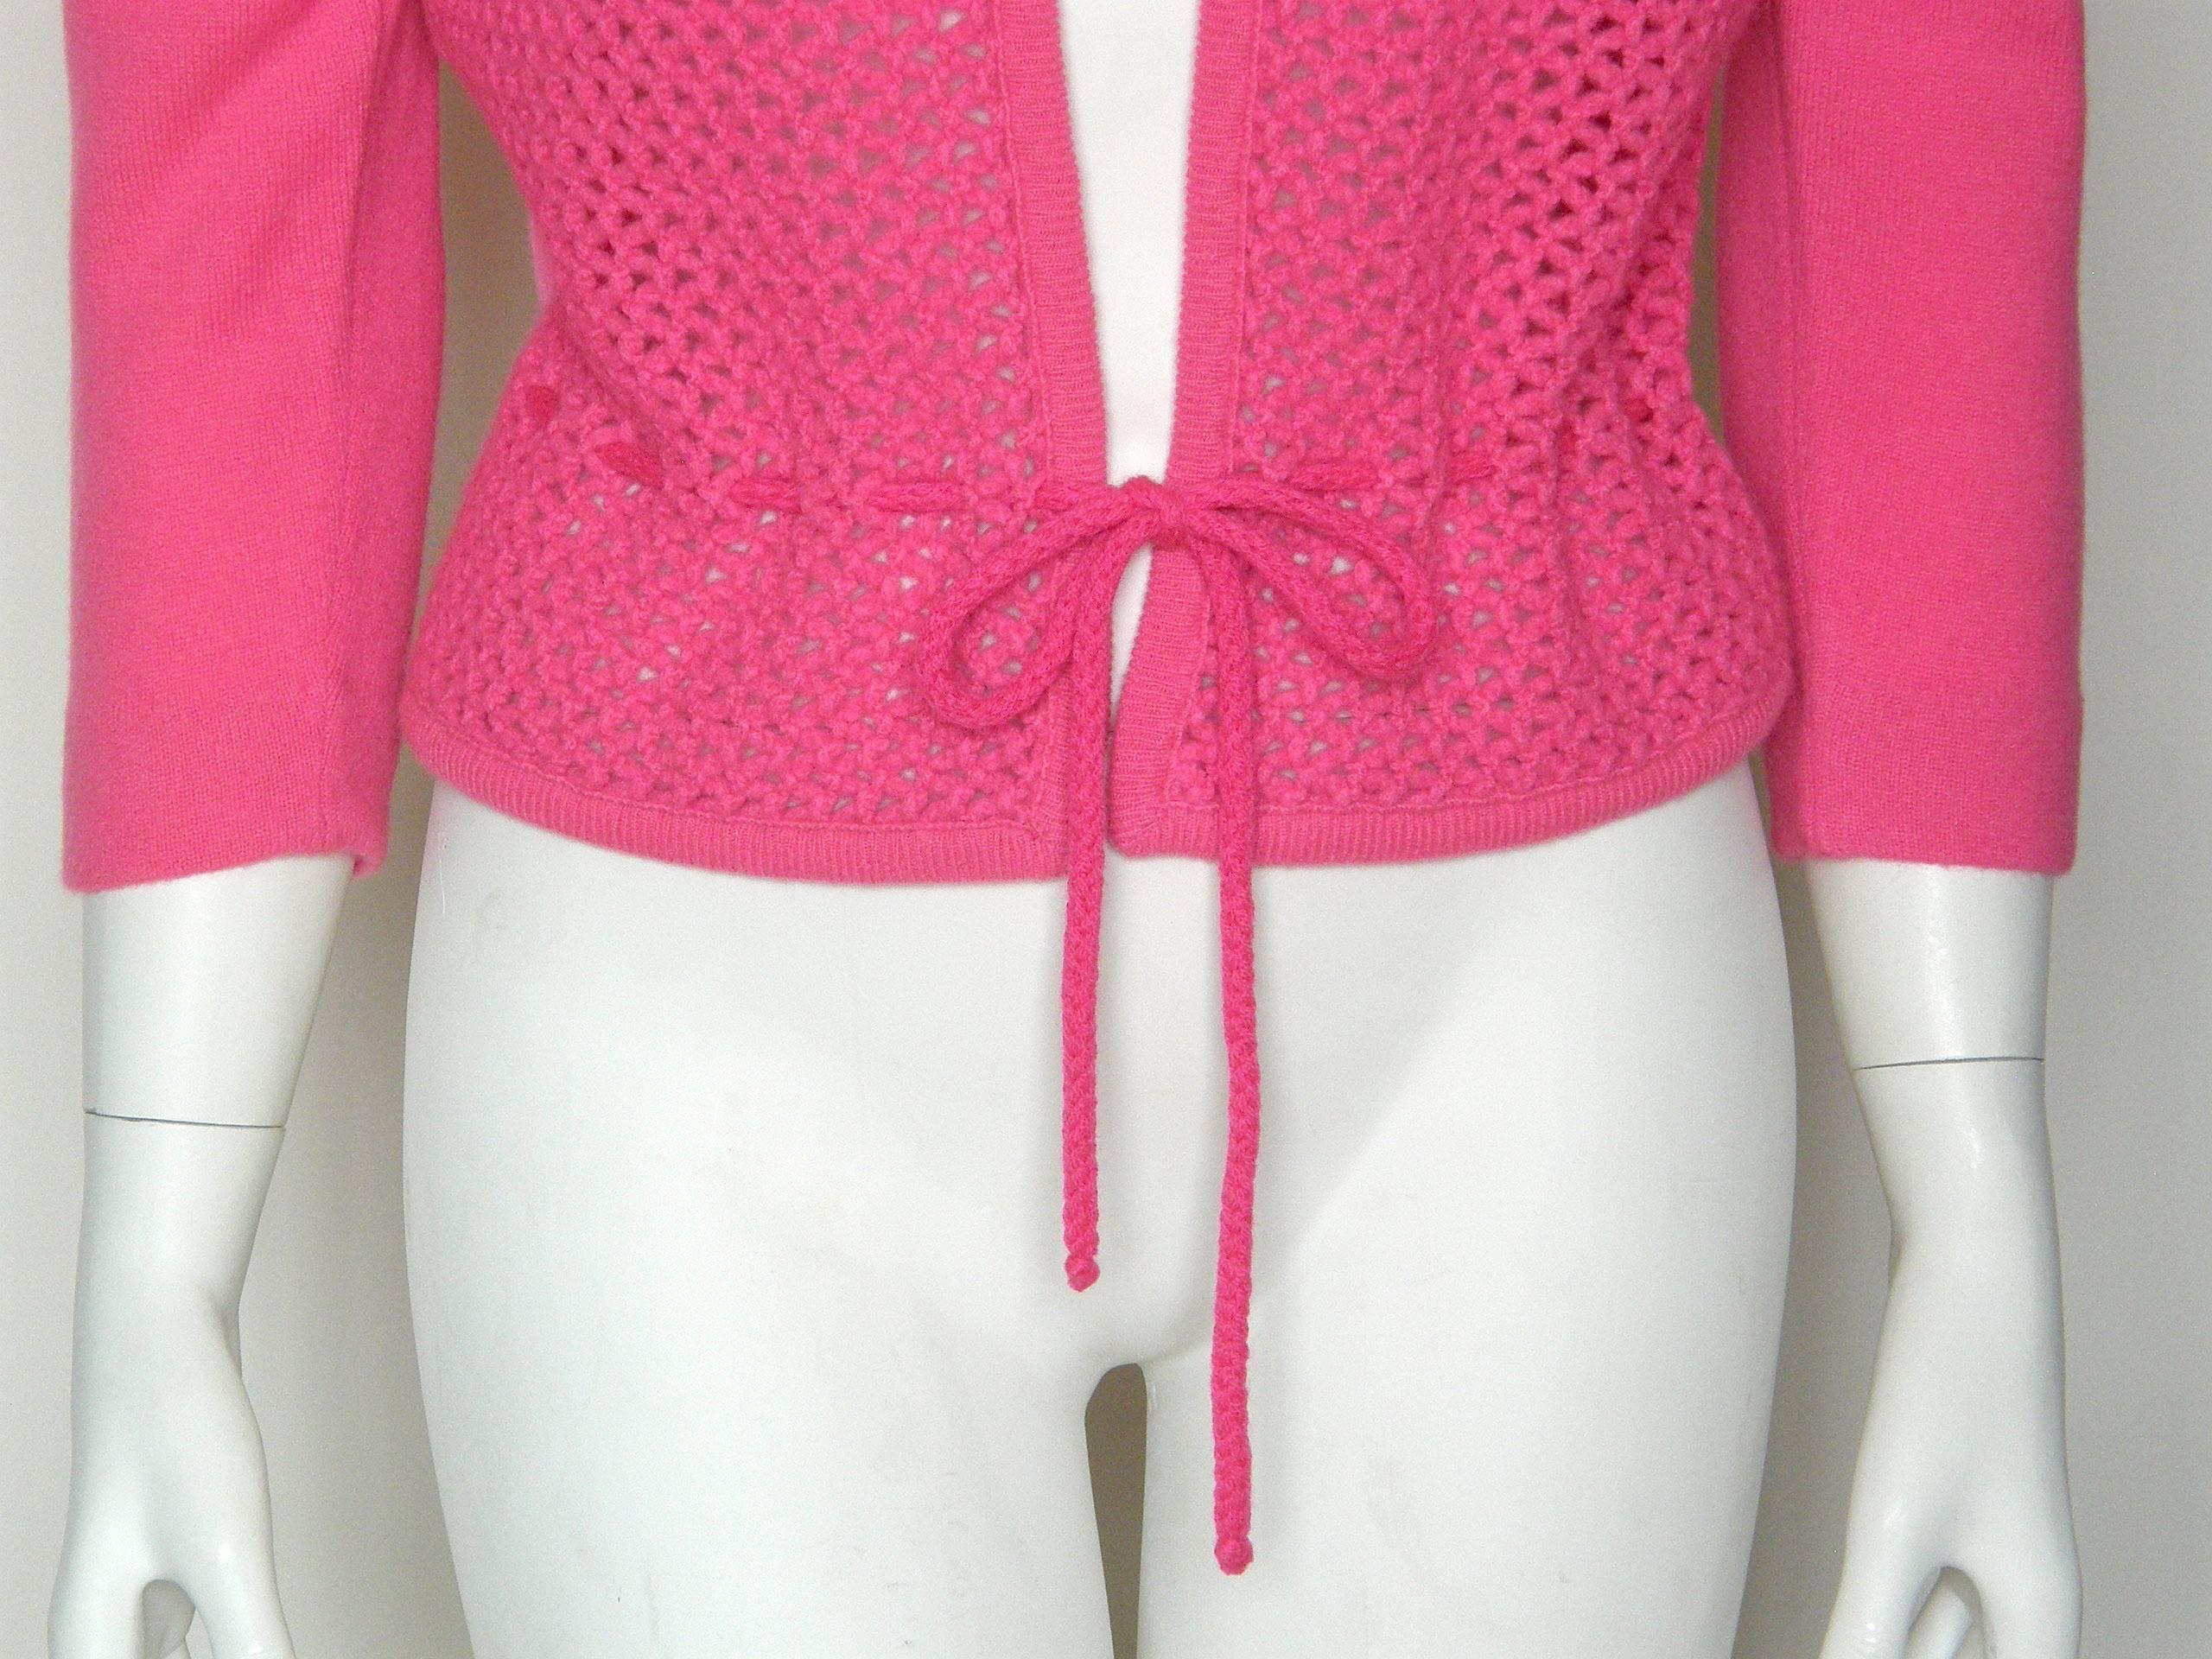 Dalton Shocking Pink Cashmere Cardigan Fishnet Sweater with Waist Tie In Good Condition For Sale In Chicago, IL